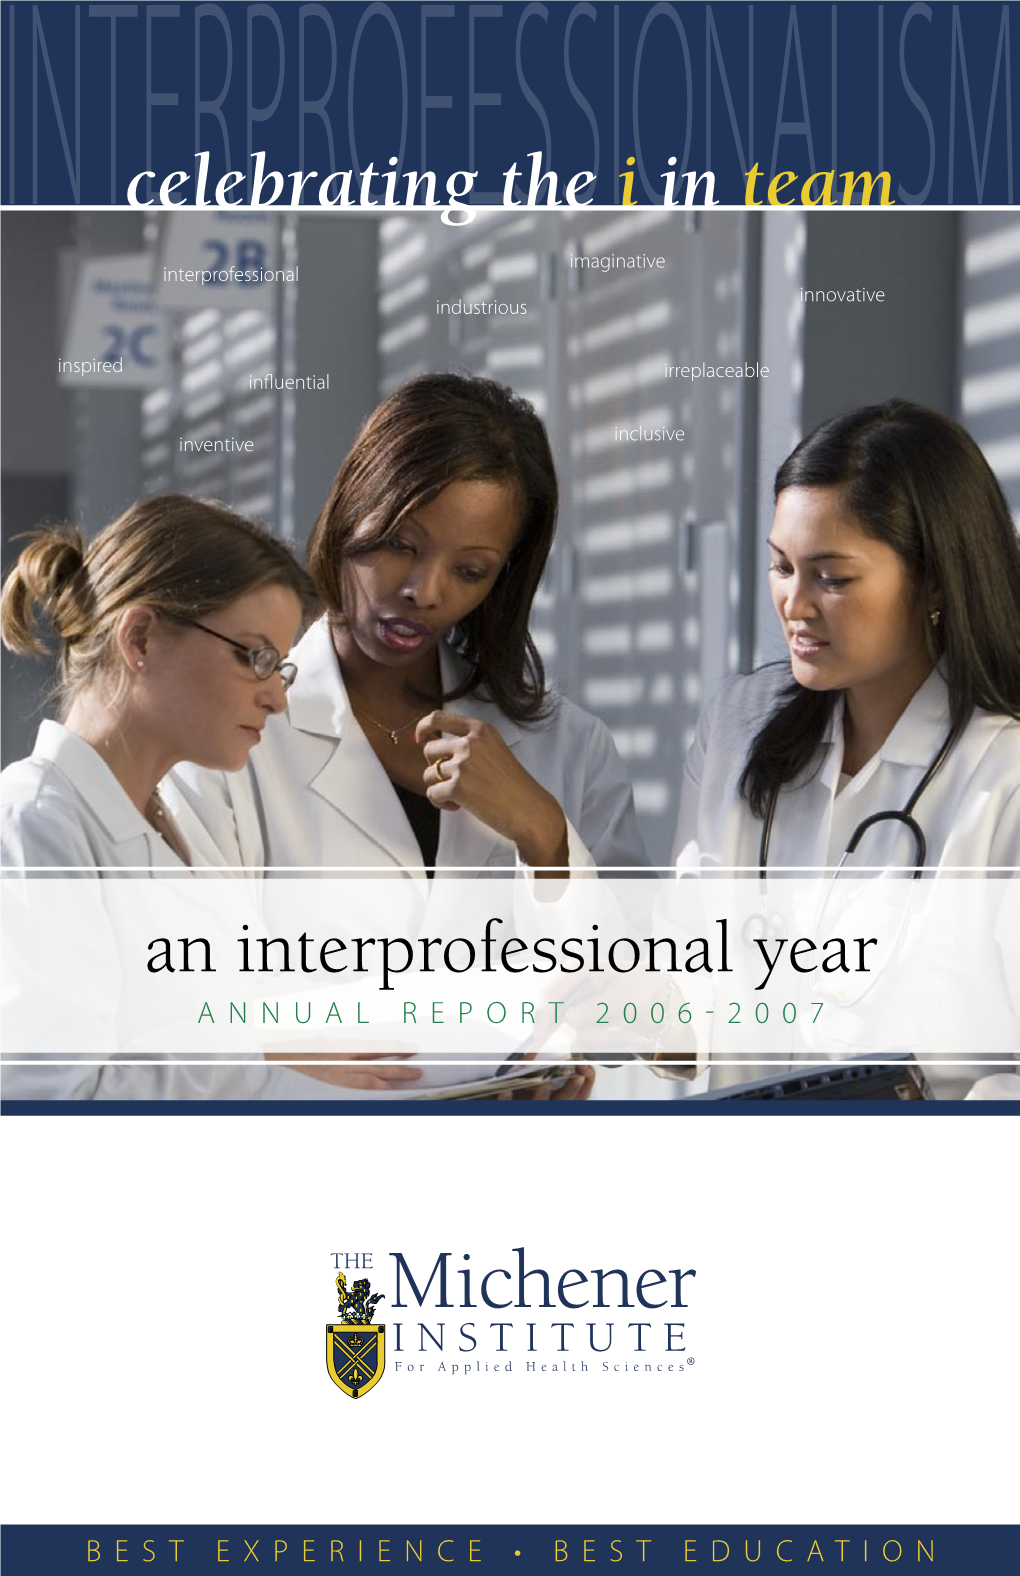 2006/2007 the Michener Institute for Applied Health Sciences Enthusiastically Embraced the Many Important I’S Found in Successful Collaborative Teams